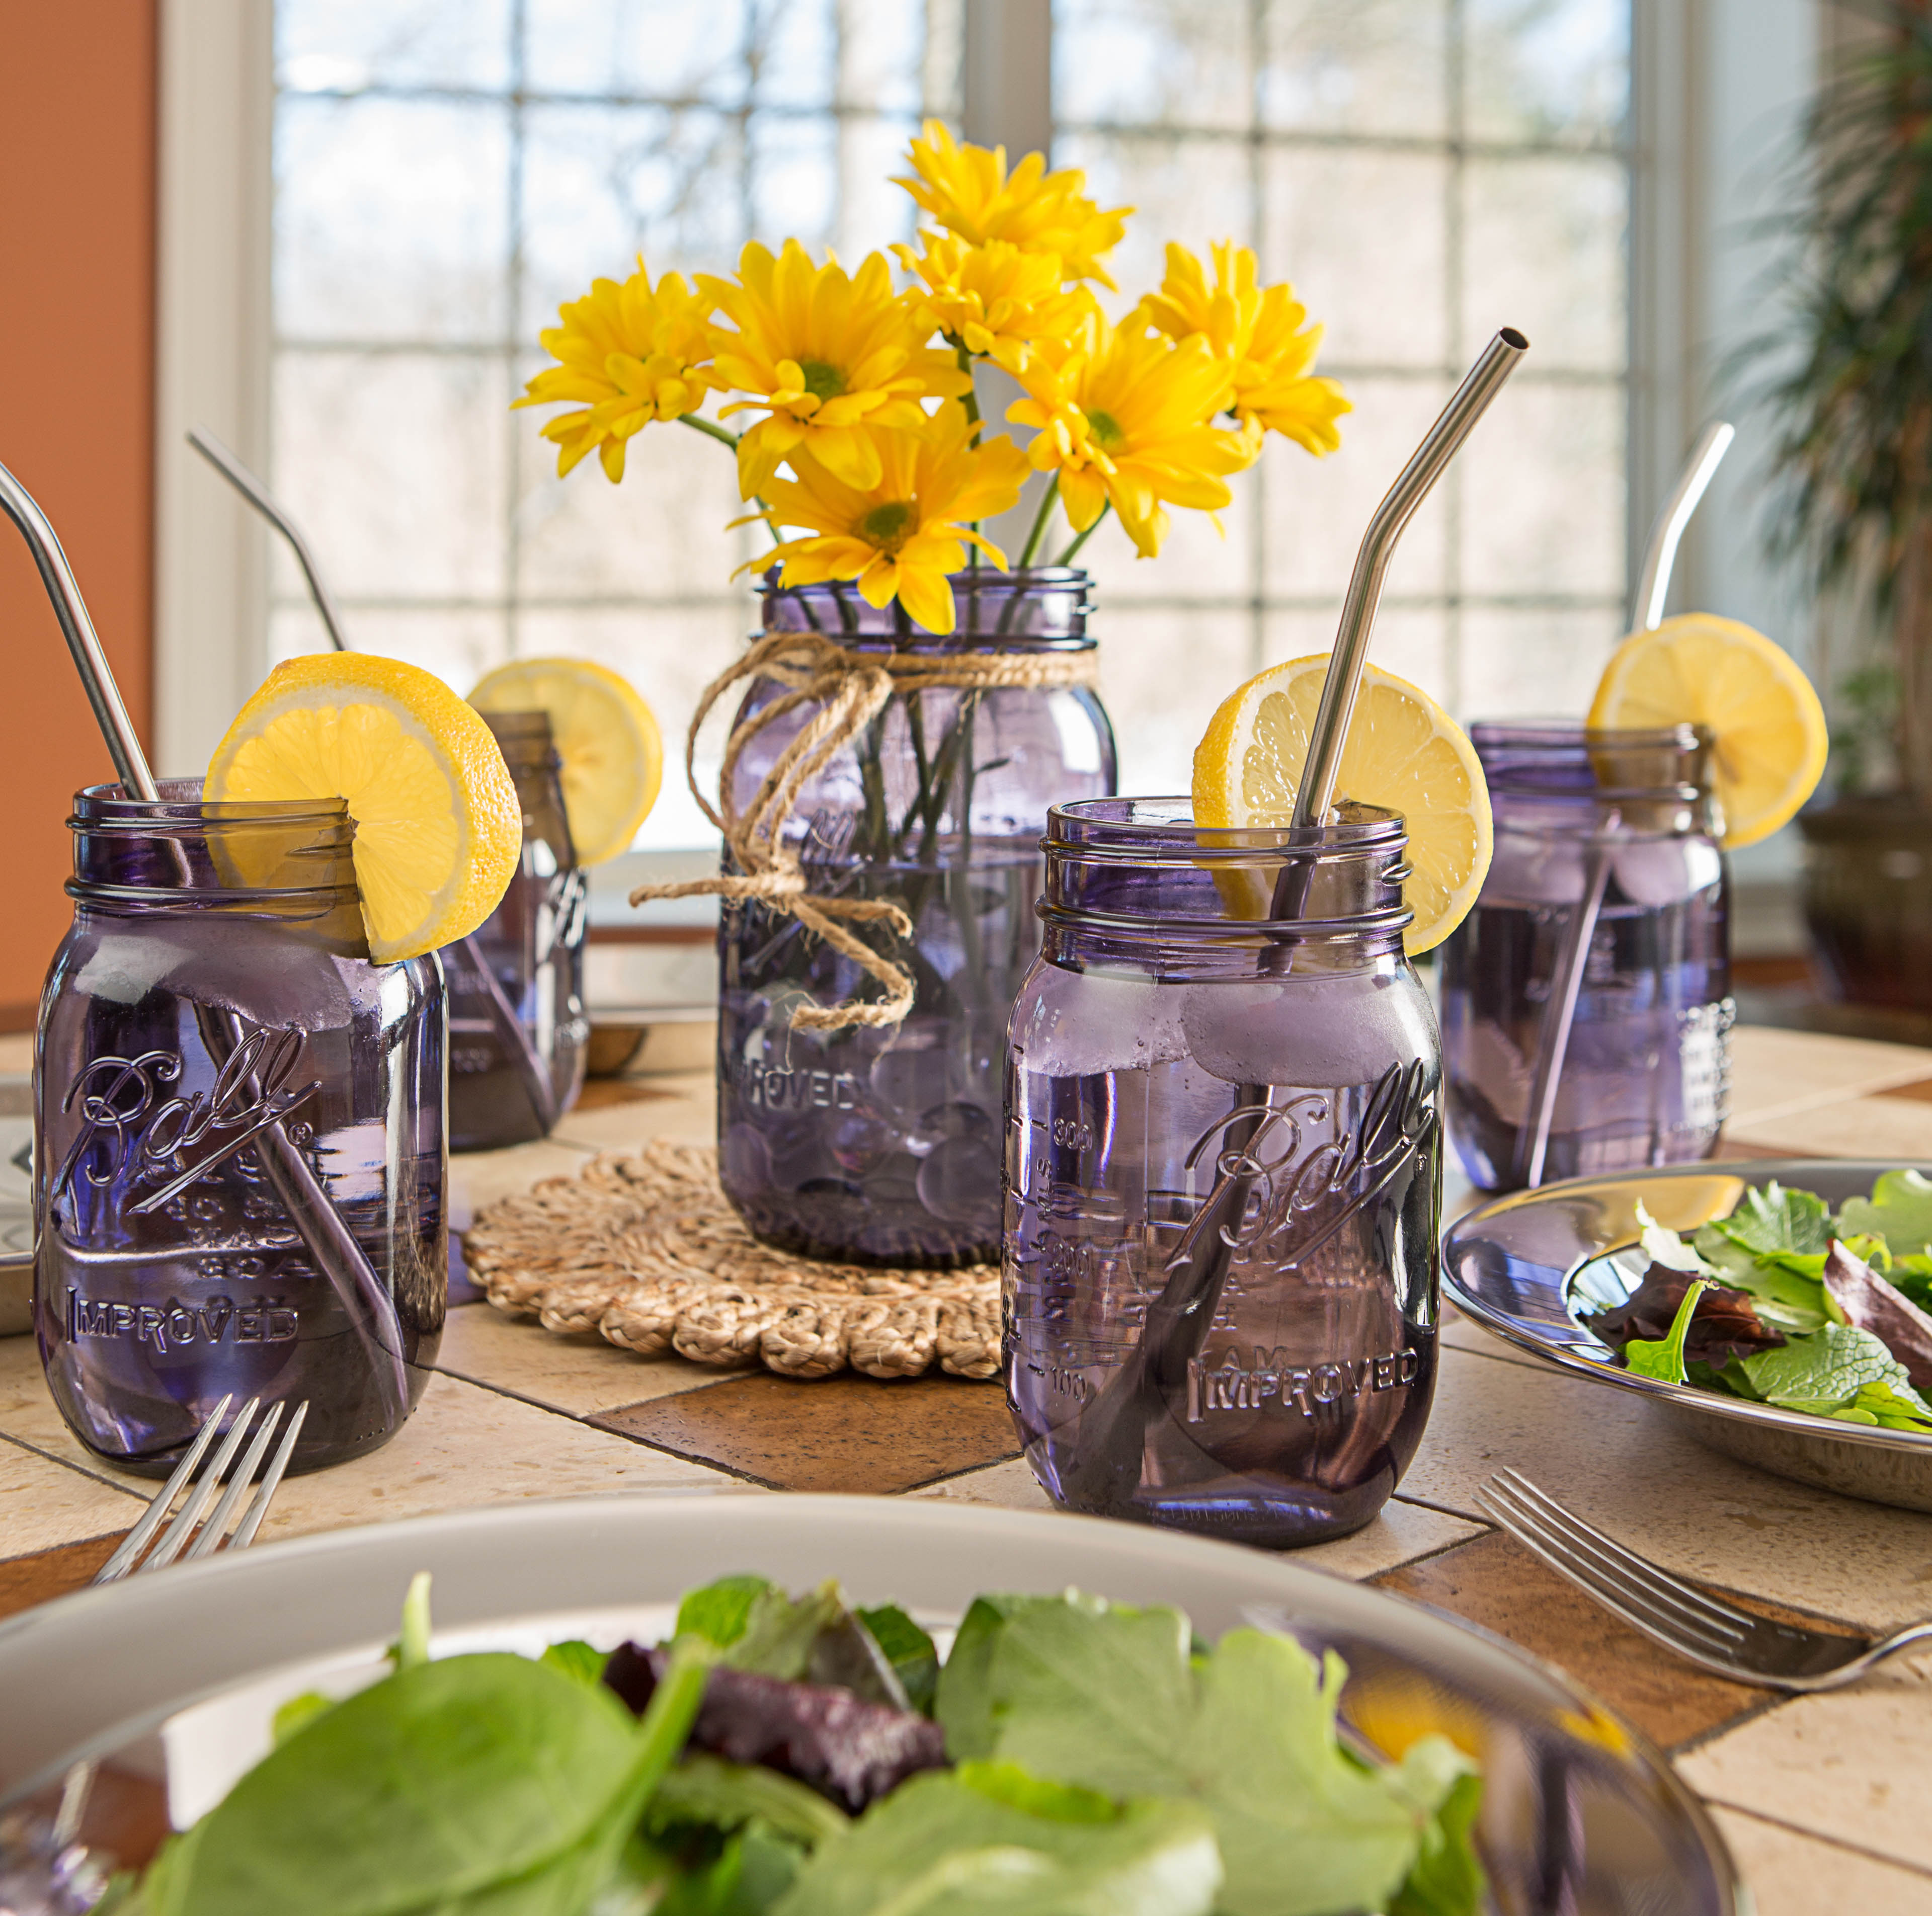 Purple canning jars and classy stainless steel straws give this brunch table a pop of color and style. At Lehmans.com and our store in Kidron, Ohio.